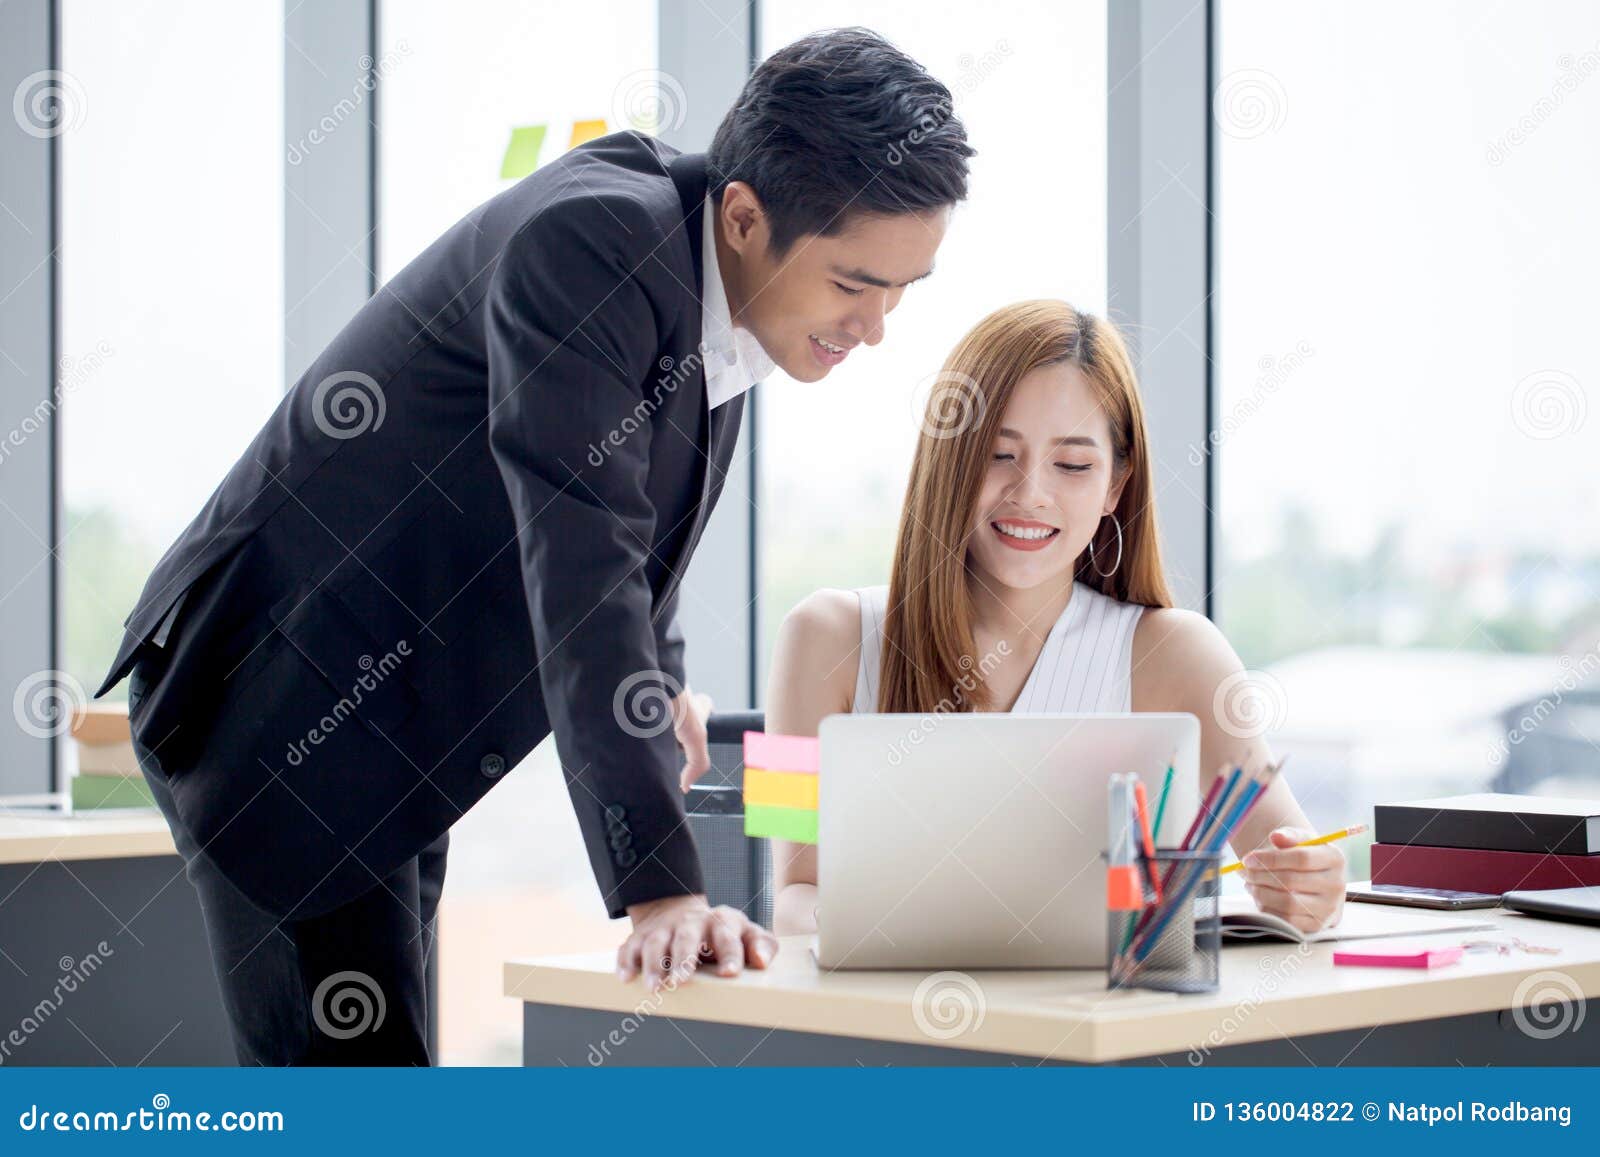 Business Partners Team Working Together On Desk With Laptop And